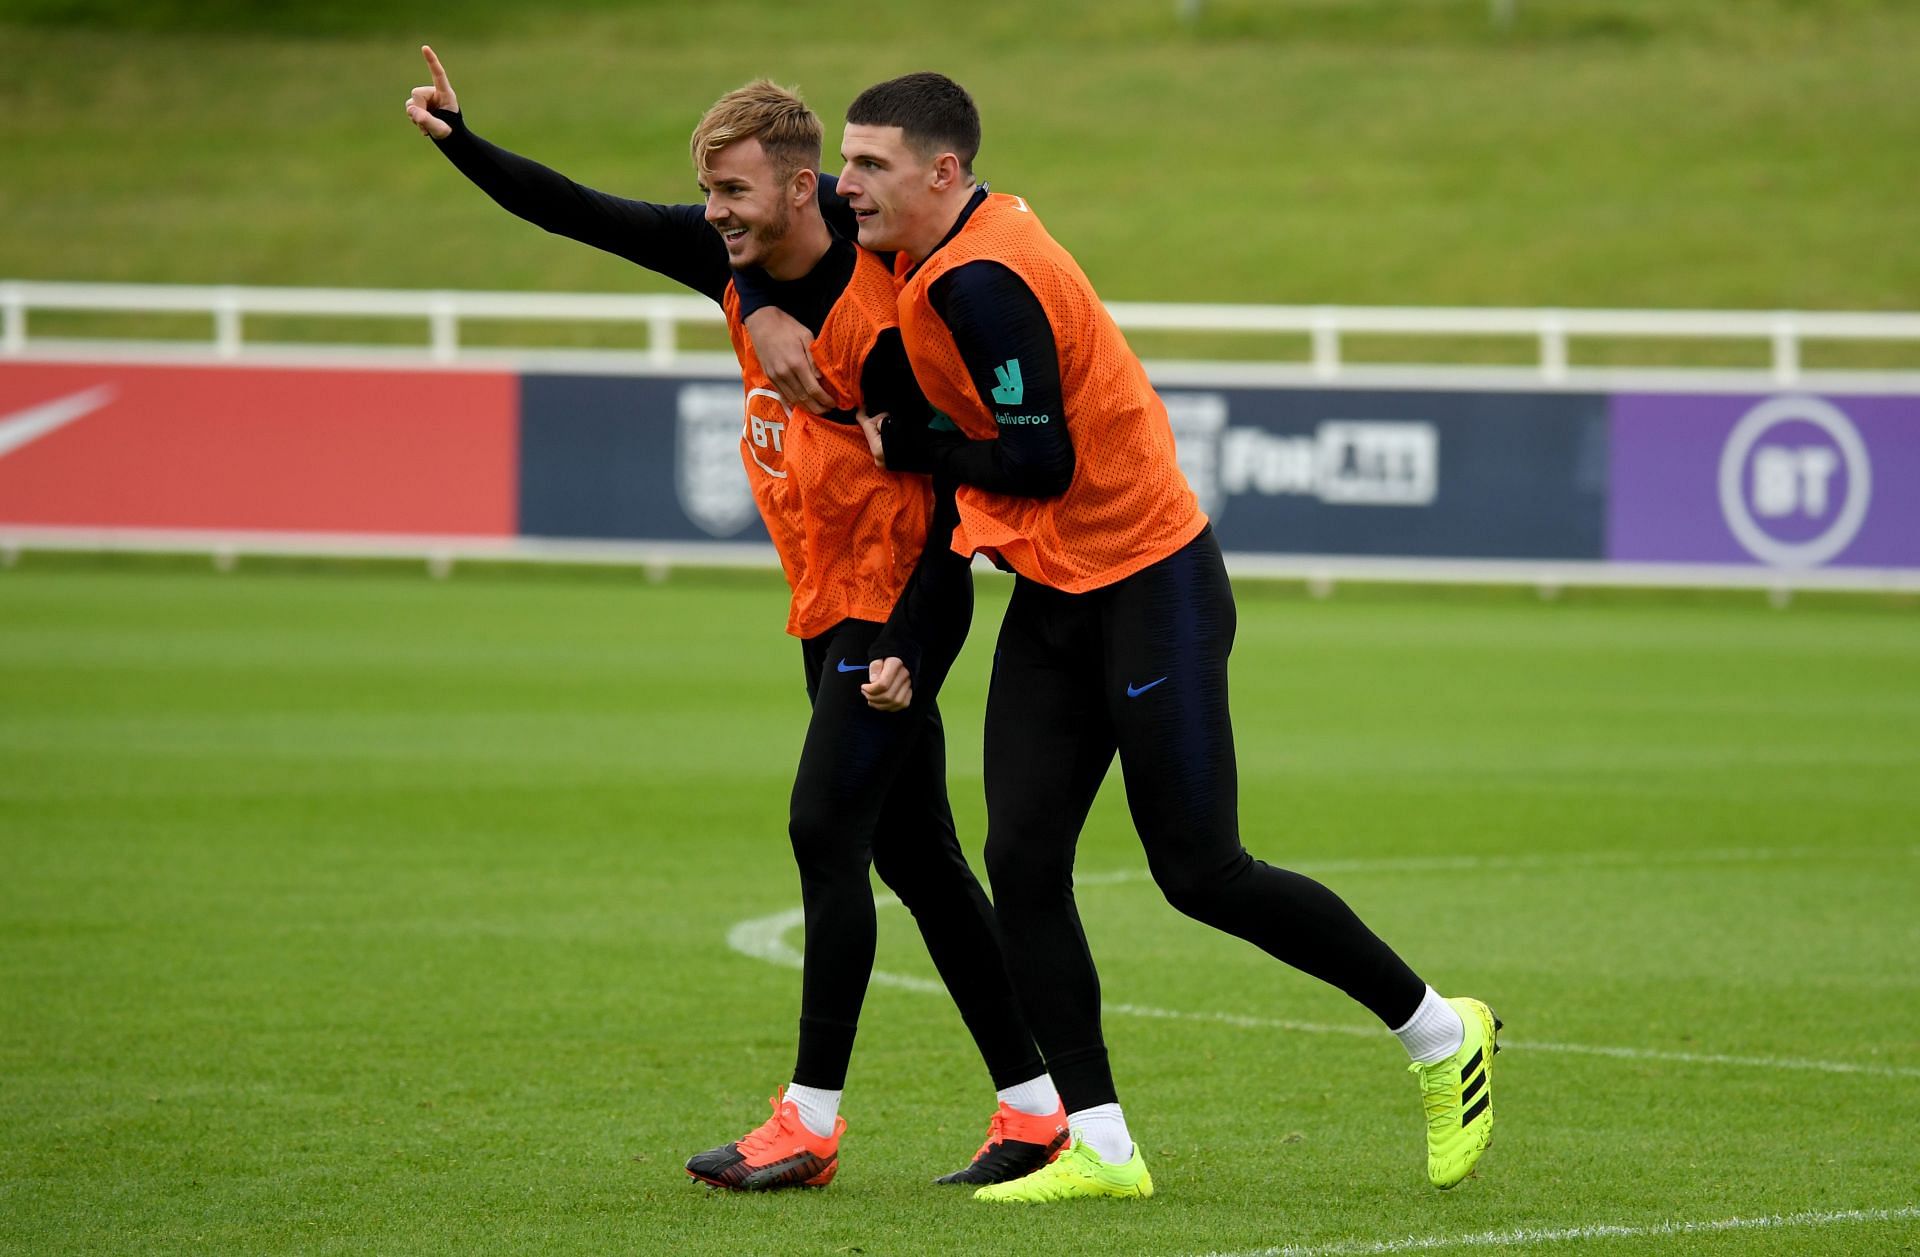 James Maddison locked horns with his England teammate earlier this season.